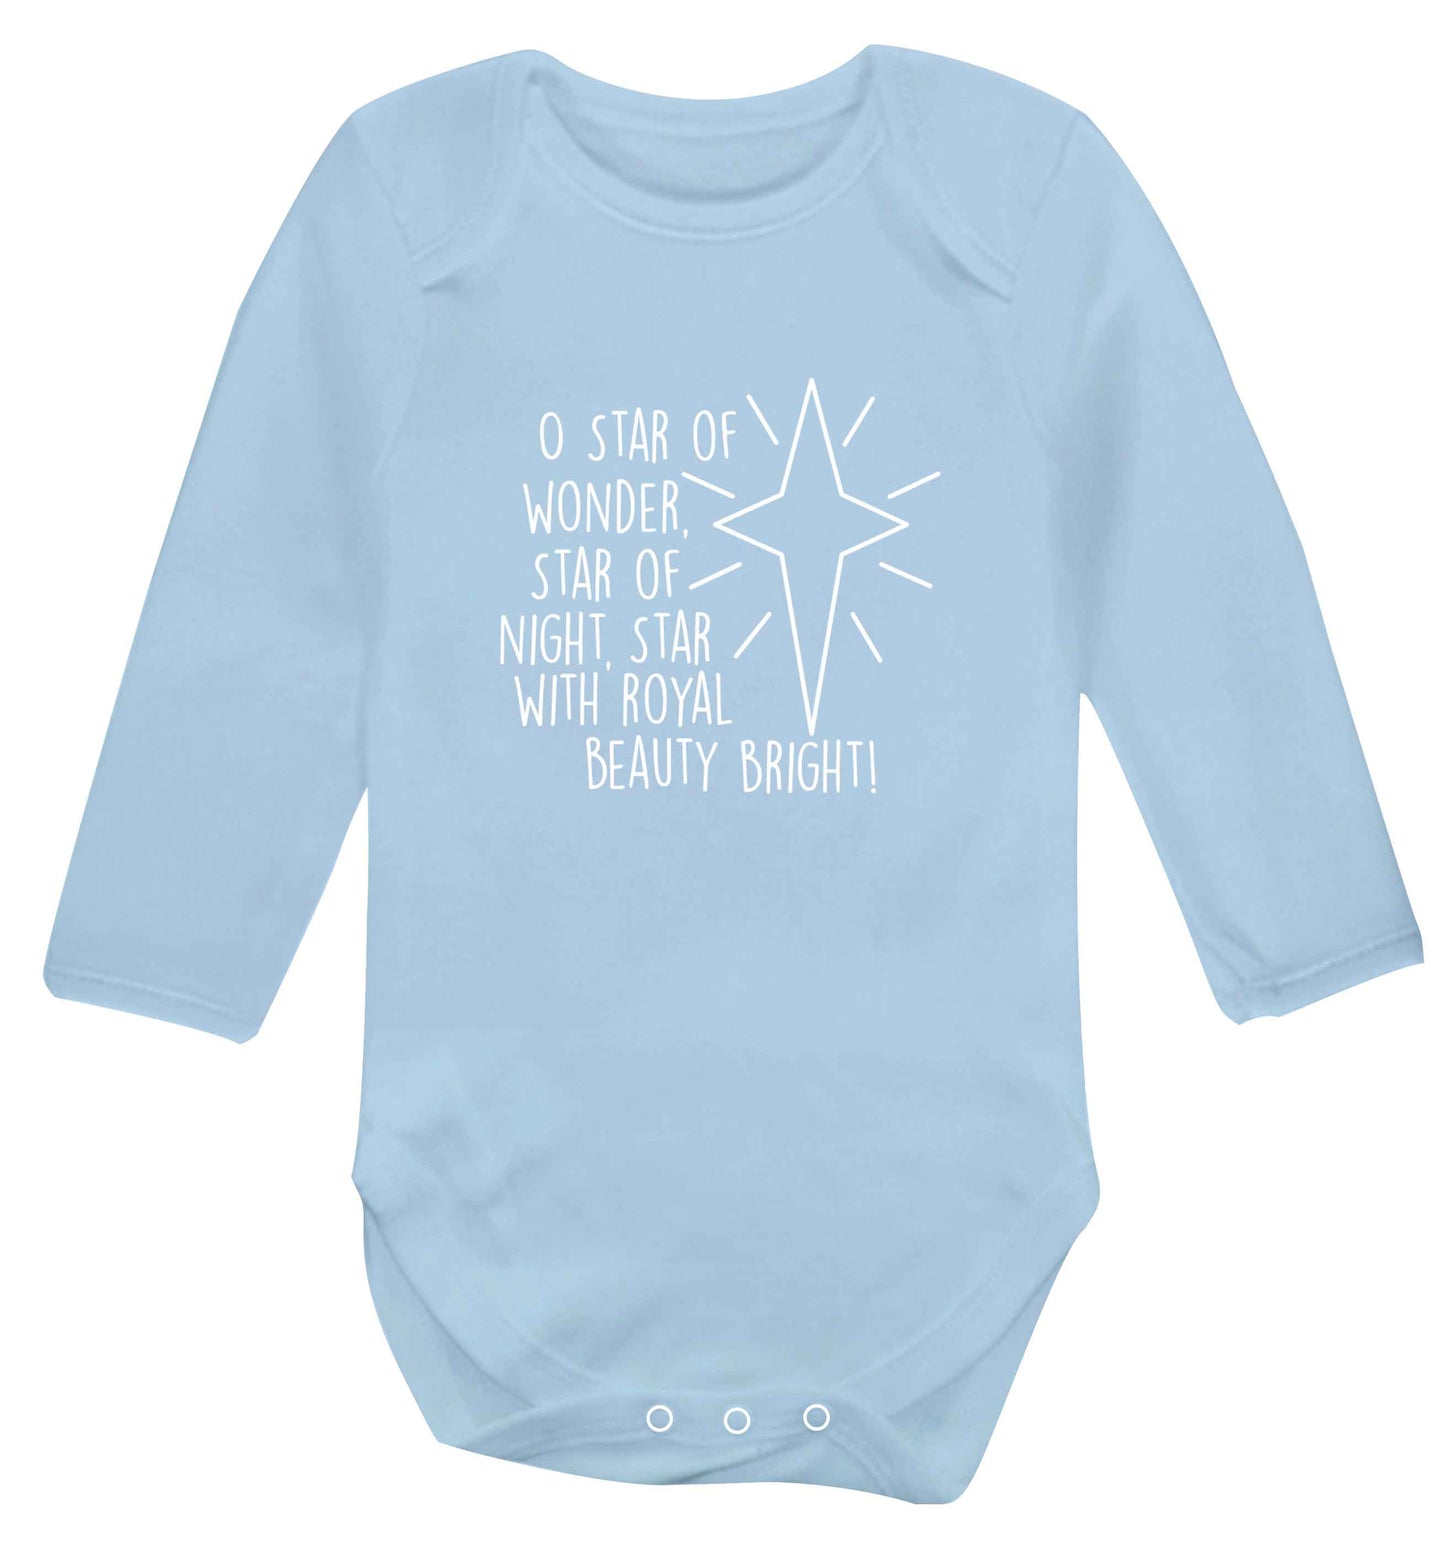 Oh star of wonder star of night, star with royal beauty bright baby vest long sleeved pale blue 6-12 months